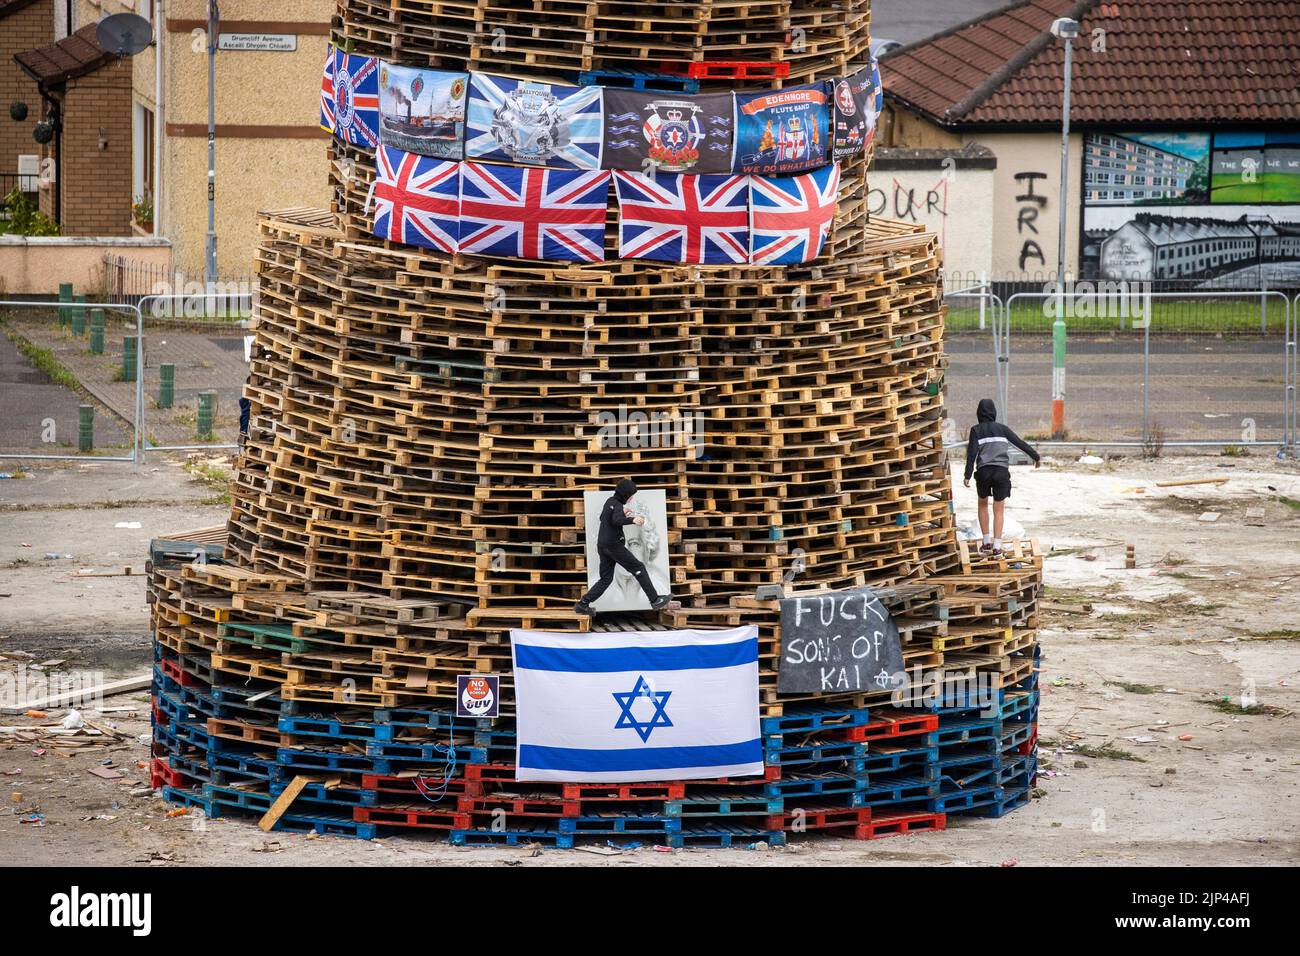 NOTE LANGUAGE ON BANNER Young boys climb around a bonfire prior to it being lit to mark the Catholic Feast of the Assumption in the Bogside area of Londonderry, Northern Ireland. Picture date: Monday August 15, 2022. Stock Photo